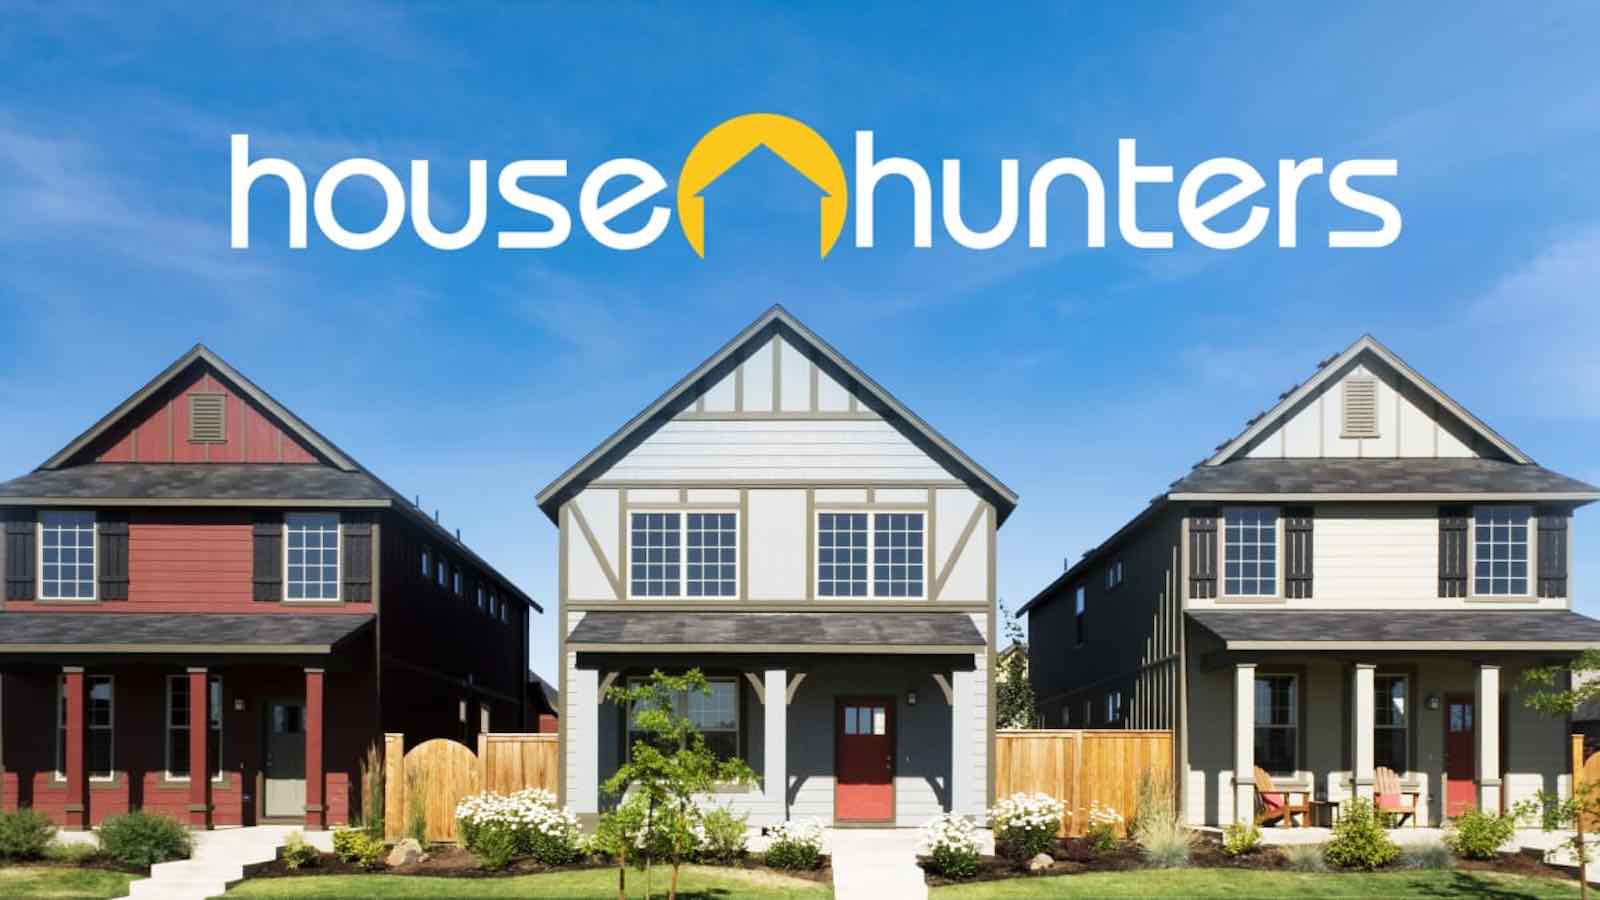 Best real estate. Hunter House. House Hunters TV show. Хаус Хантер риэлтор. Real Estate poster.